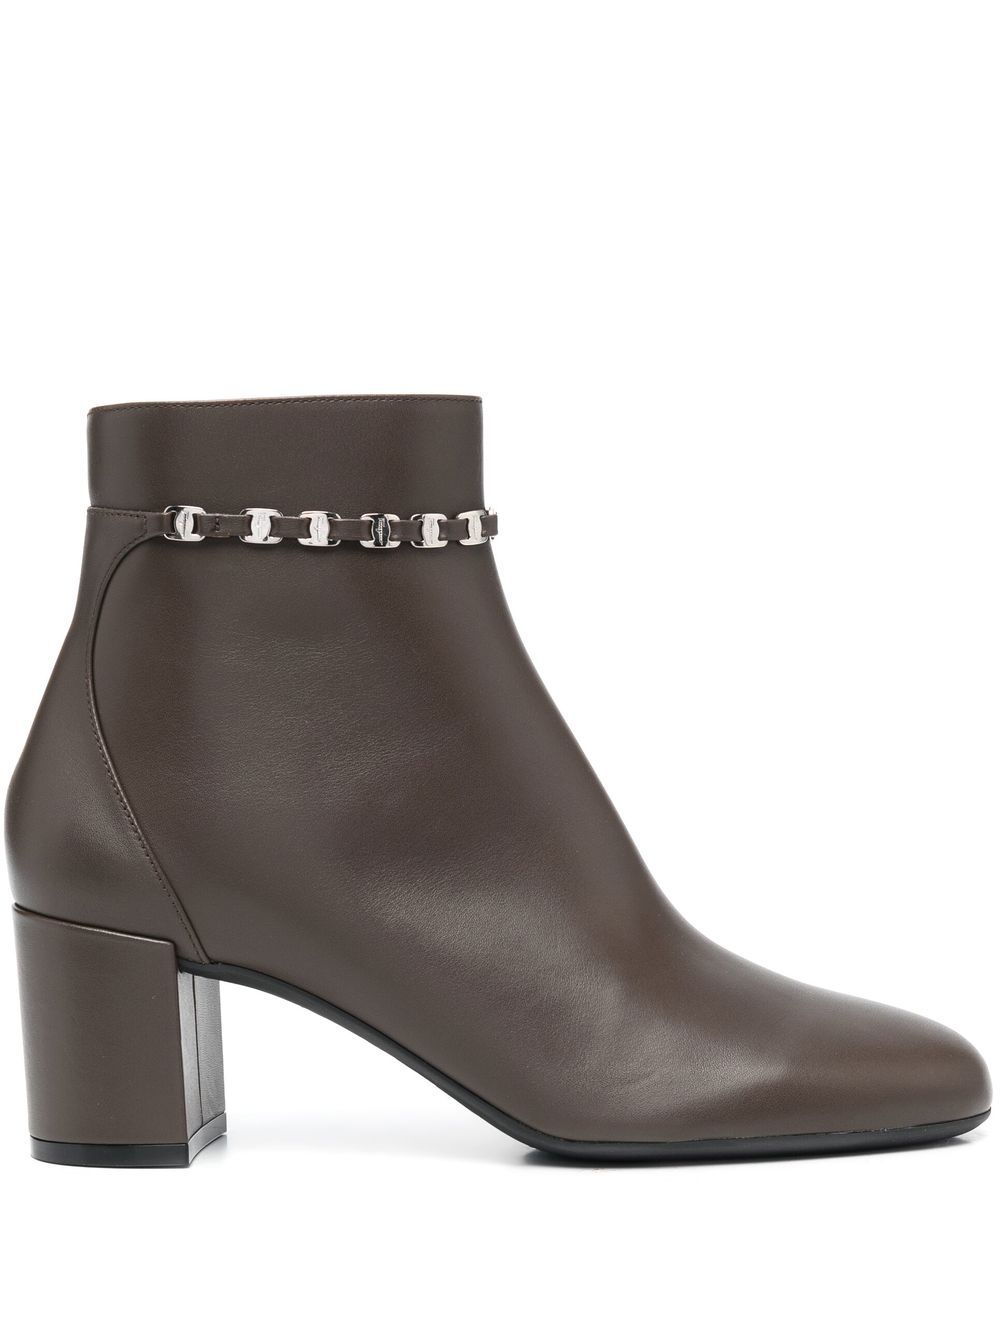 Ferragamo chain-link leather ankle boots - Brown